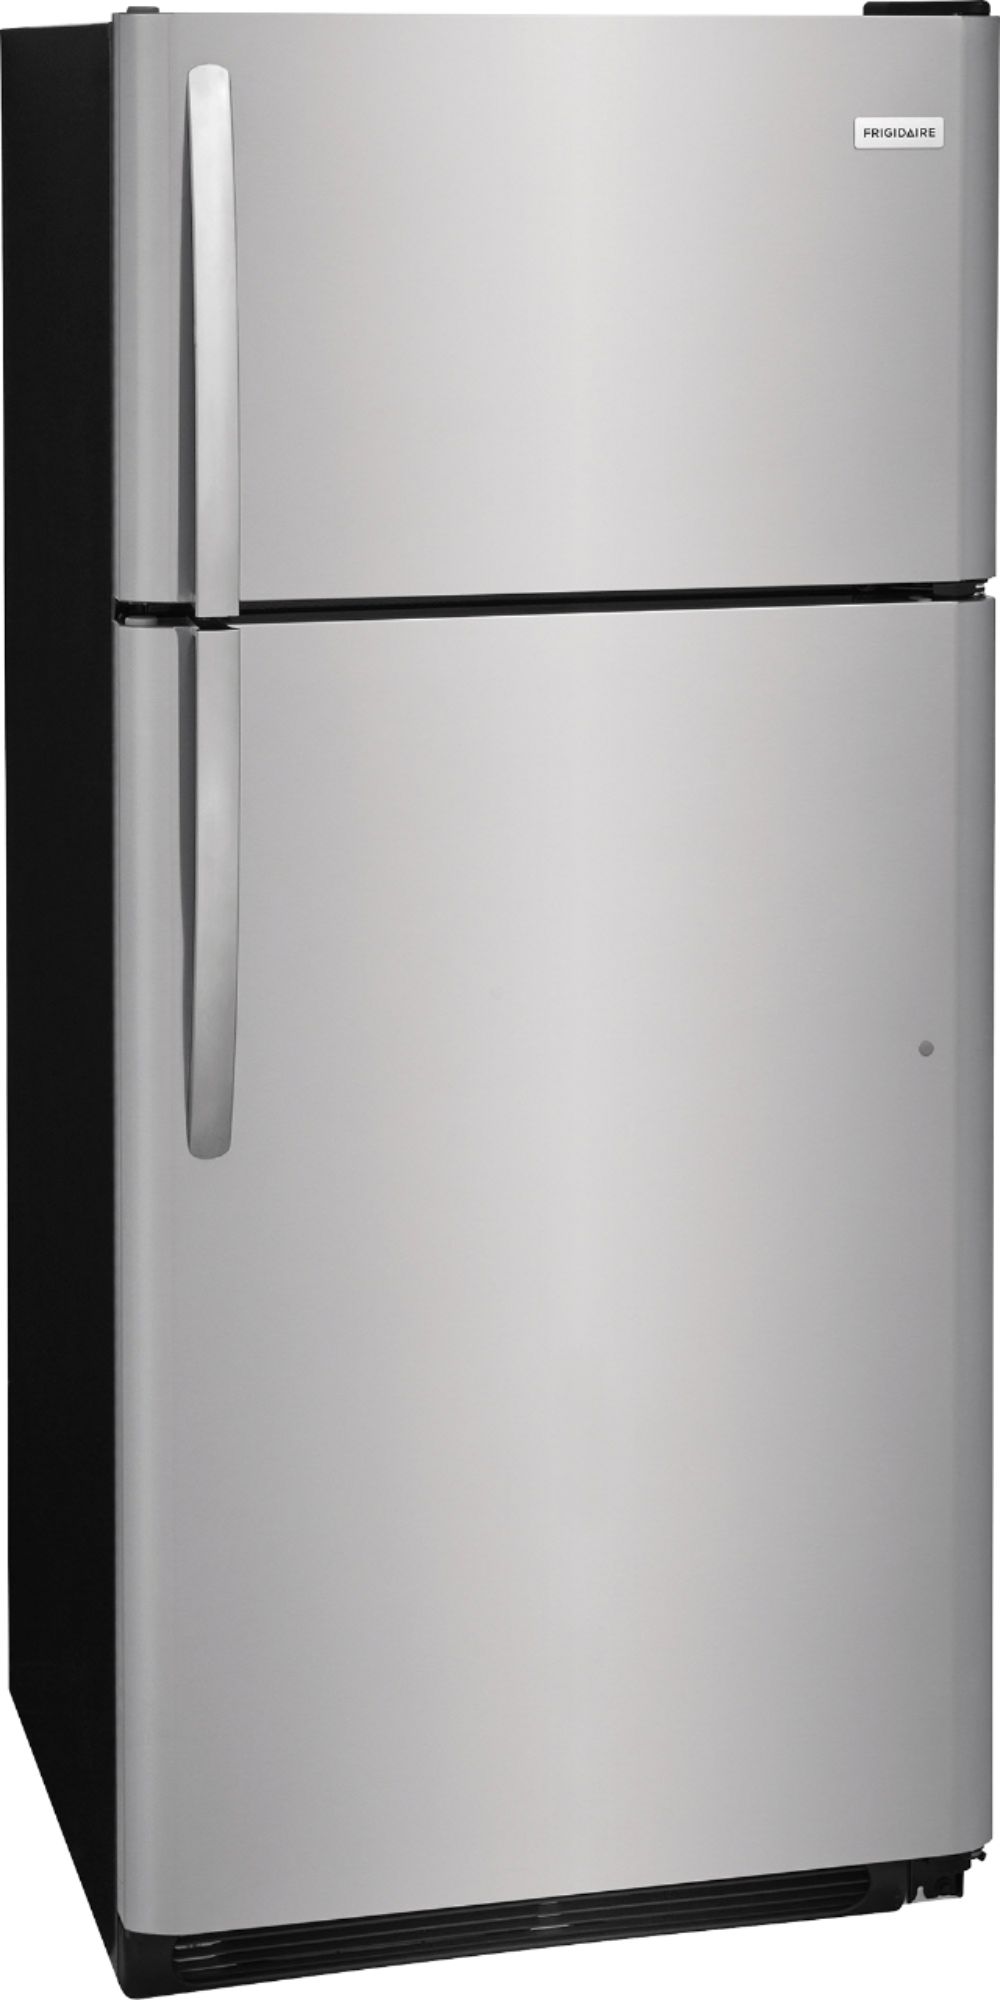 Angle View: Viking - Professional 7 Series 20 Cu. Ft. Bottom-Freezer Built-In Refrigerator - White